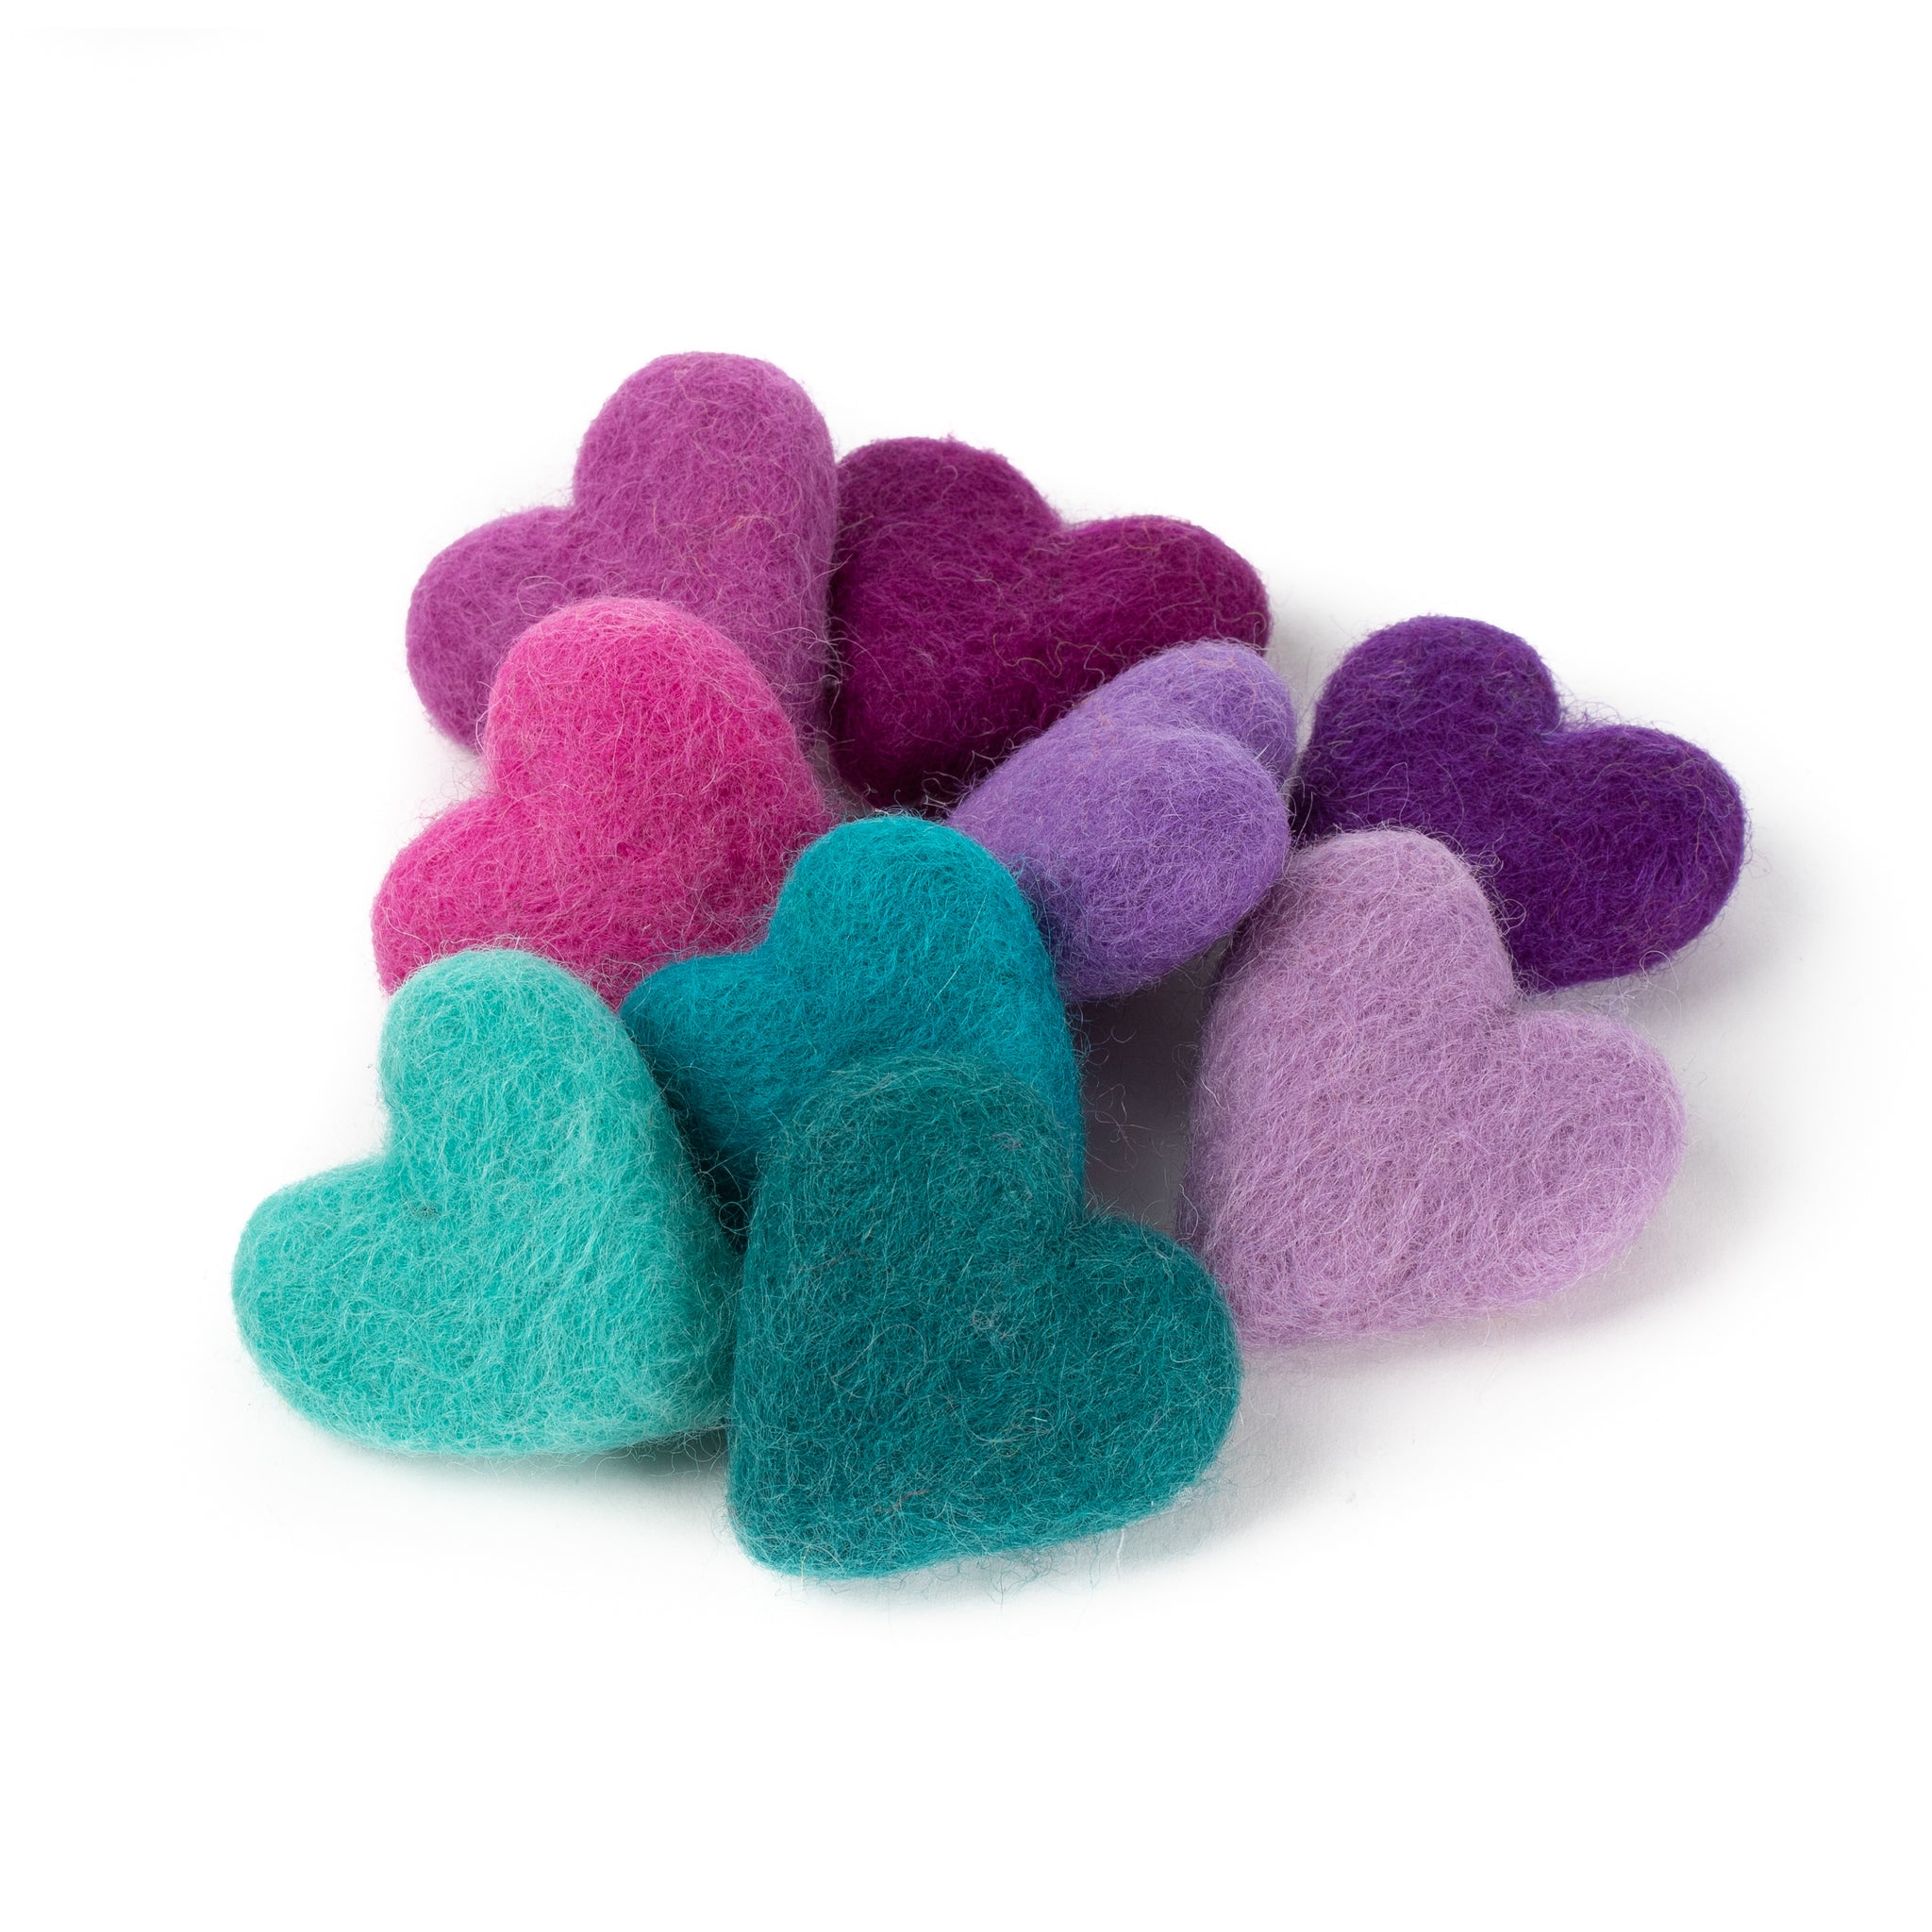 Playfully Ever After 3 inch Felt Hearts 35pc - Neon Pink